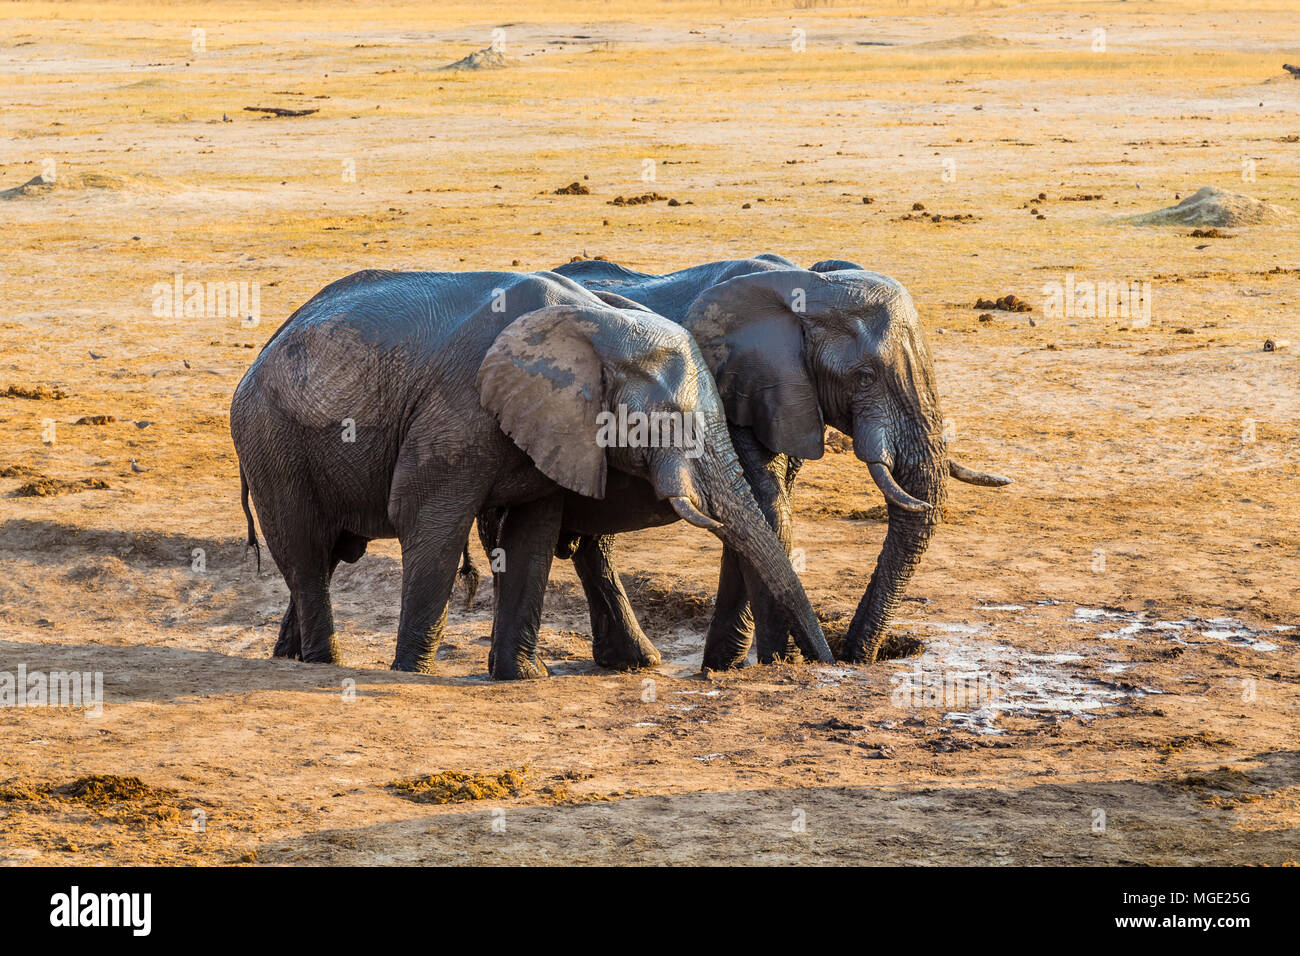 Elephants drinking the last of the water in a dried out waterhole, before the rains in Hwange National Park, Zimbabwe. September 9, 2016. Stock Photo